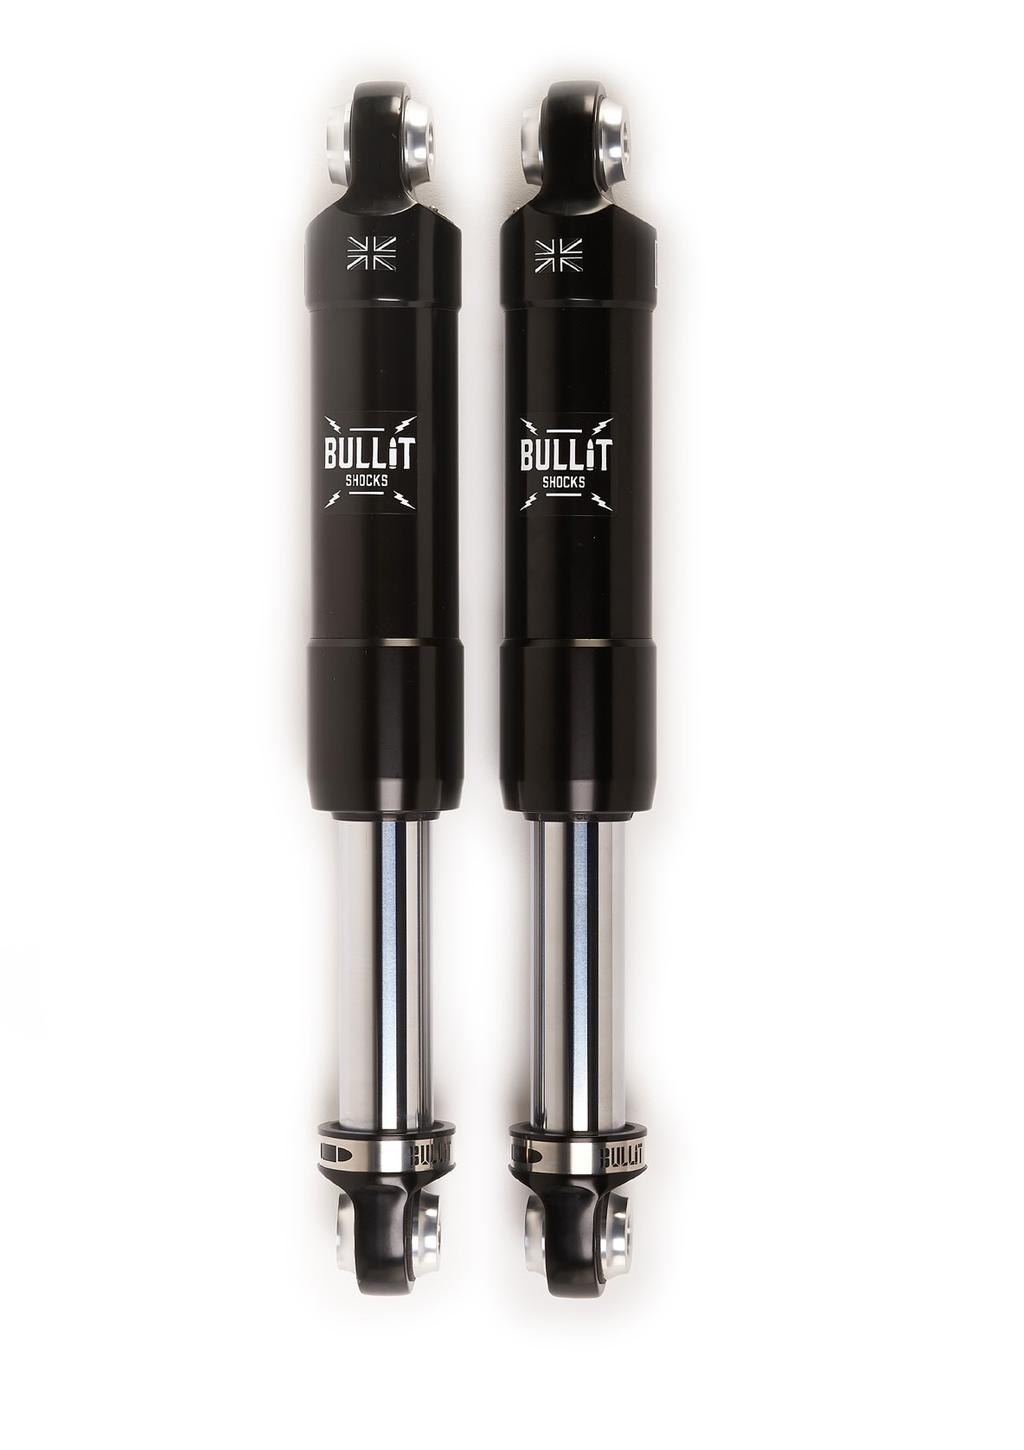 Specification The K-Tech Bullit is a new innovative shock absorber that incorporates the latest damping technology along with keeping the original look familiar with the custom bike owner.